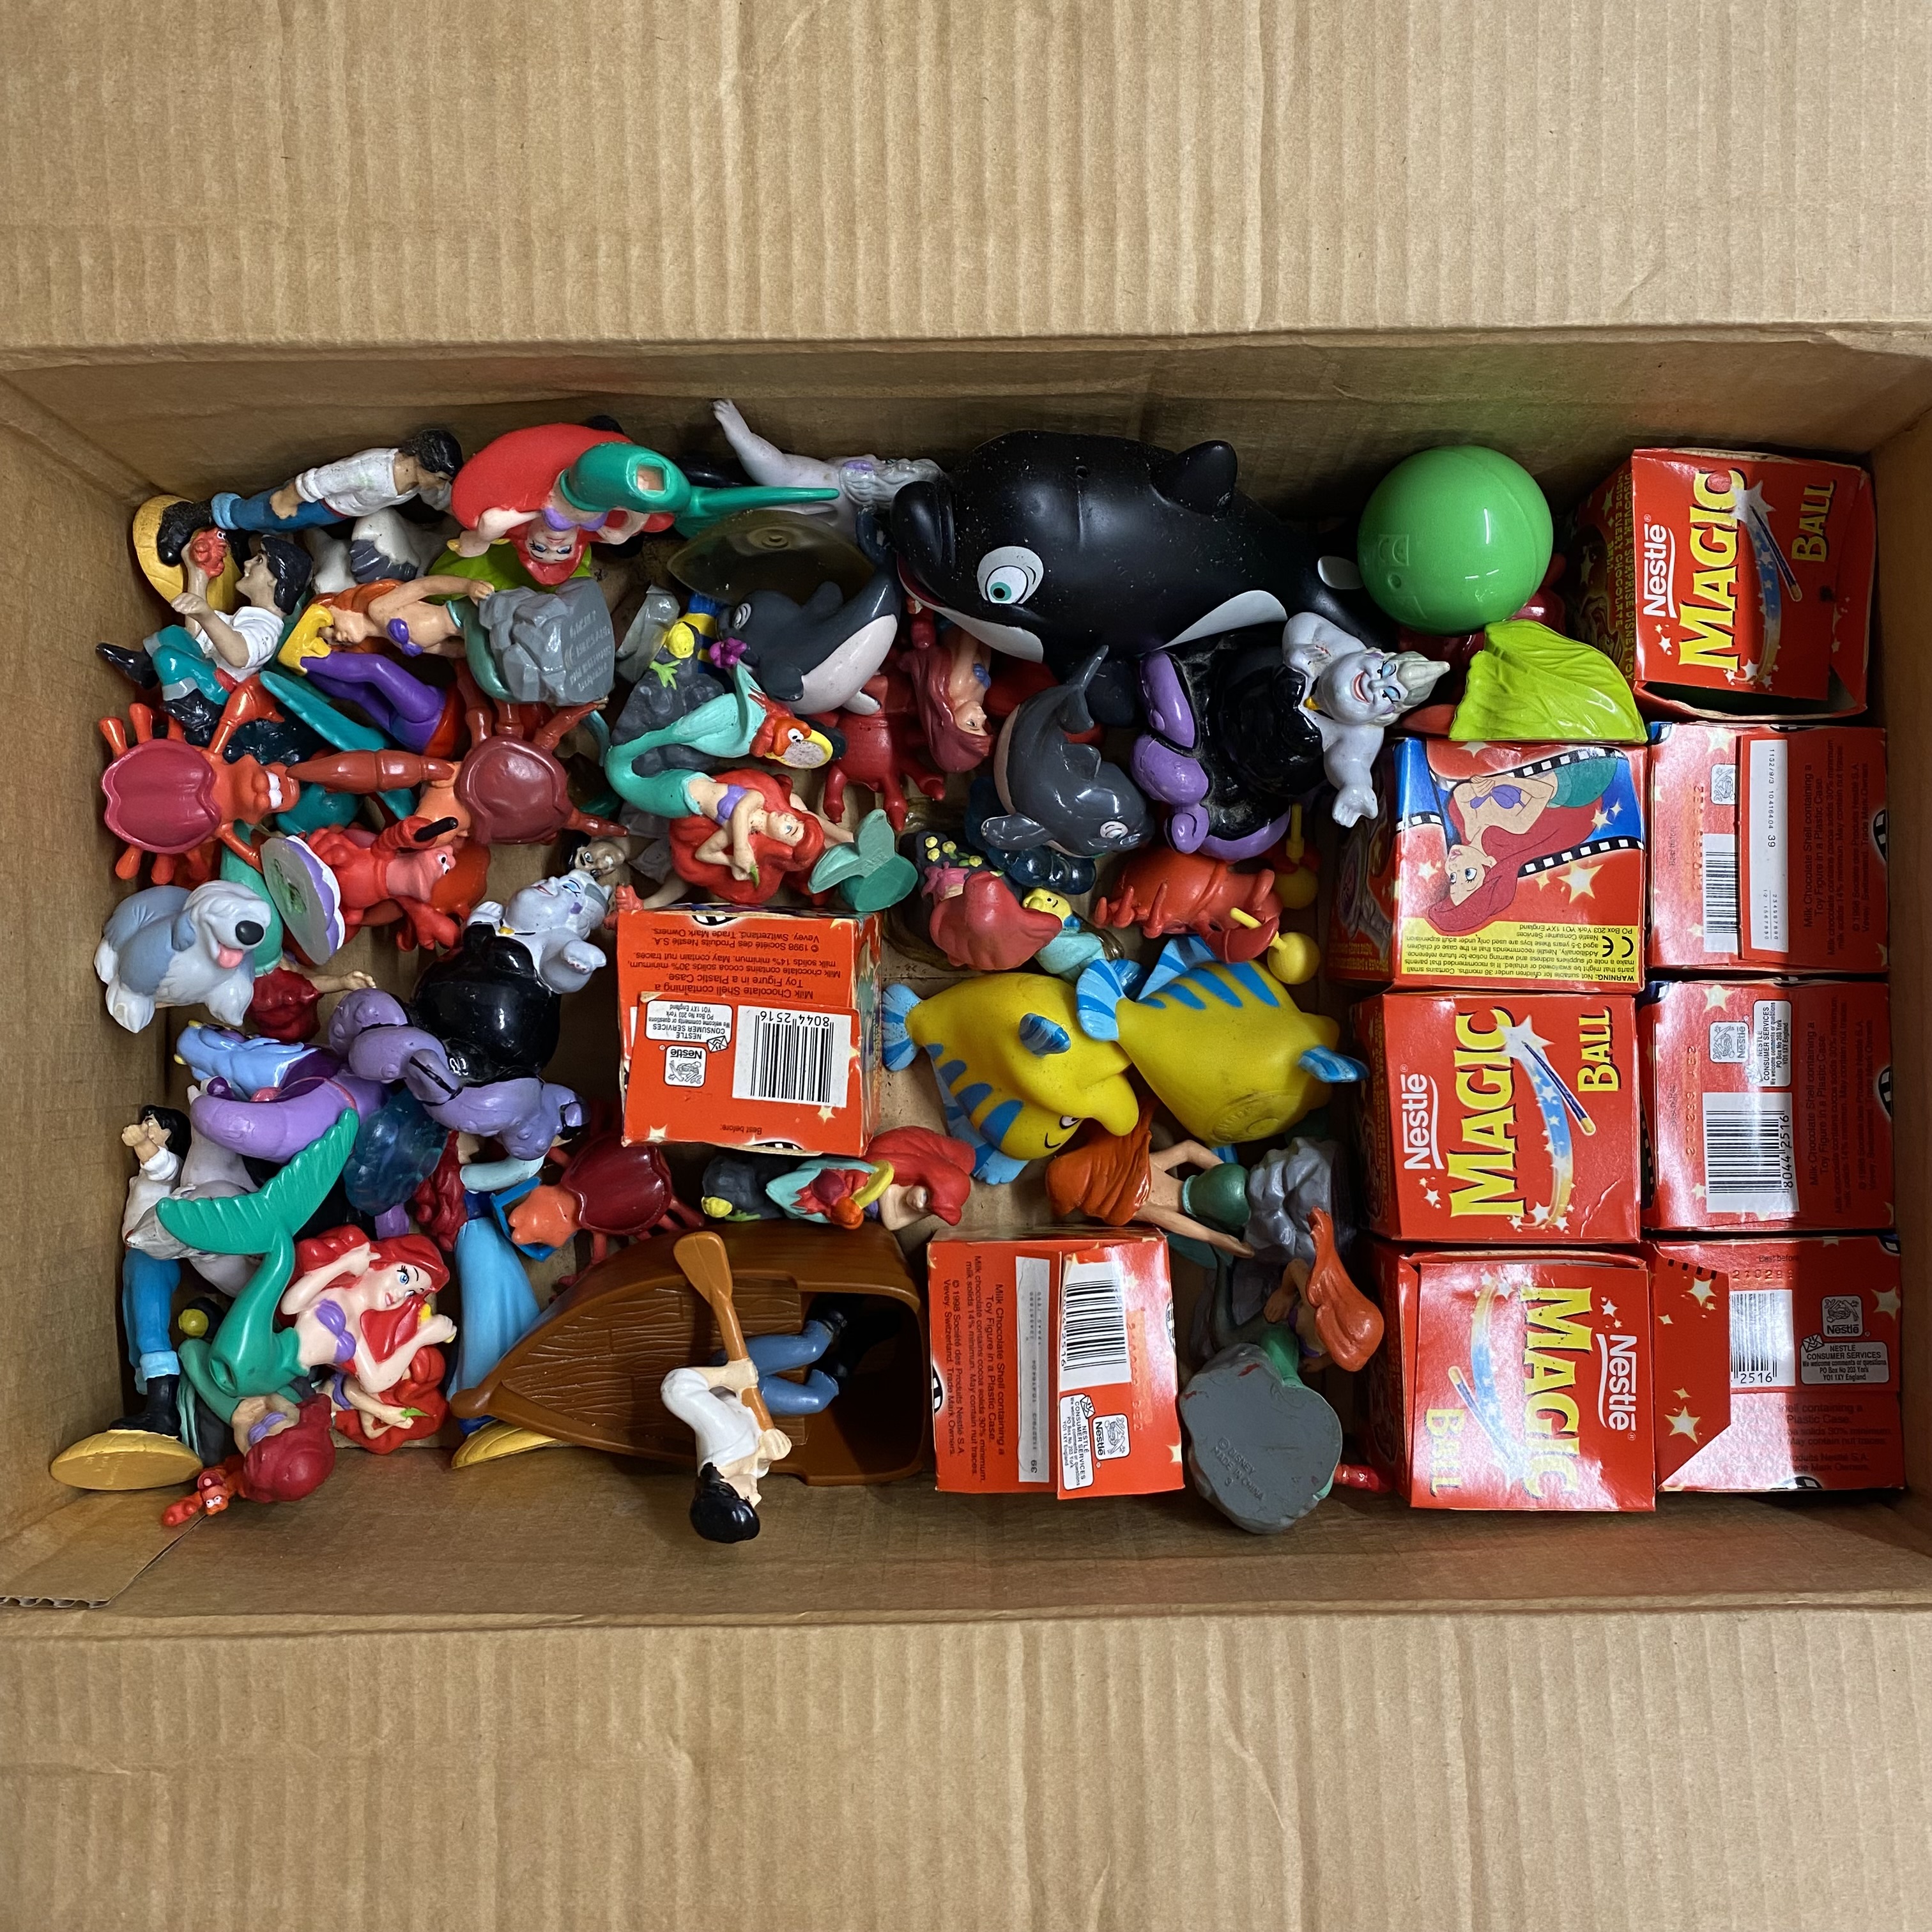 A box containing Disneys Mermaid characters. - Image 2 of 2